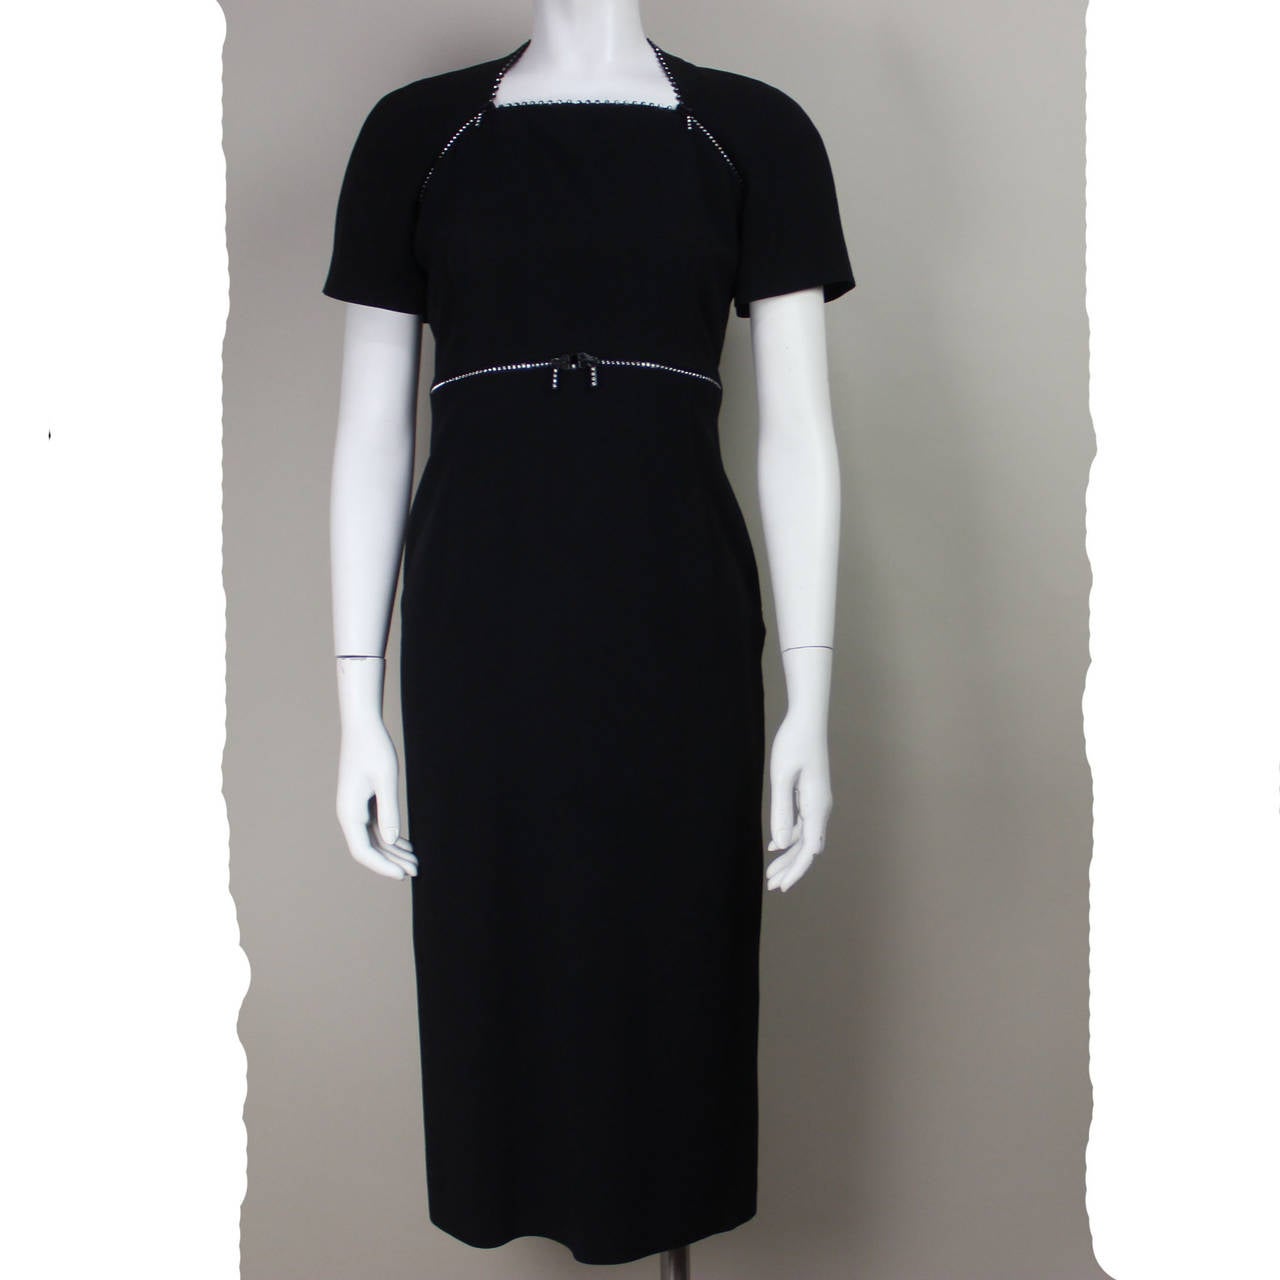 SALE Originally $350
This unique dress by Krizia features working rhinestone zipper trim along the neckline, sleeves, and waist. Clever and sexy, this detail takes the little black dress to an elevated level of stylishness.